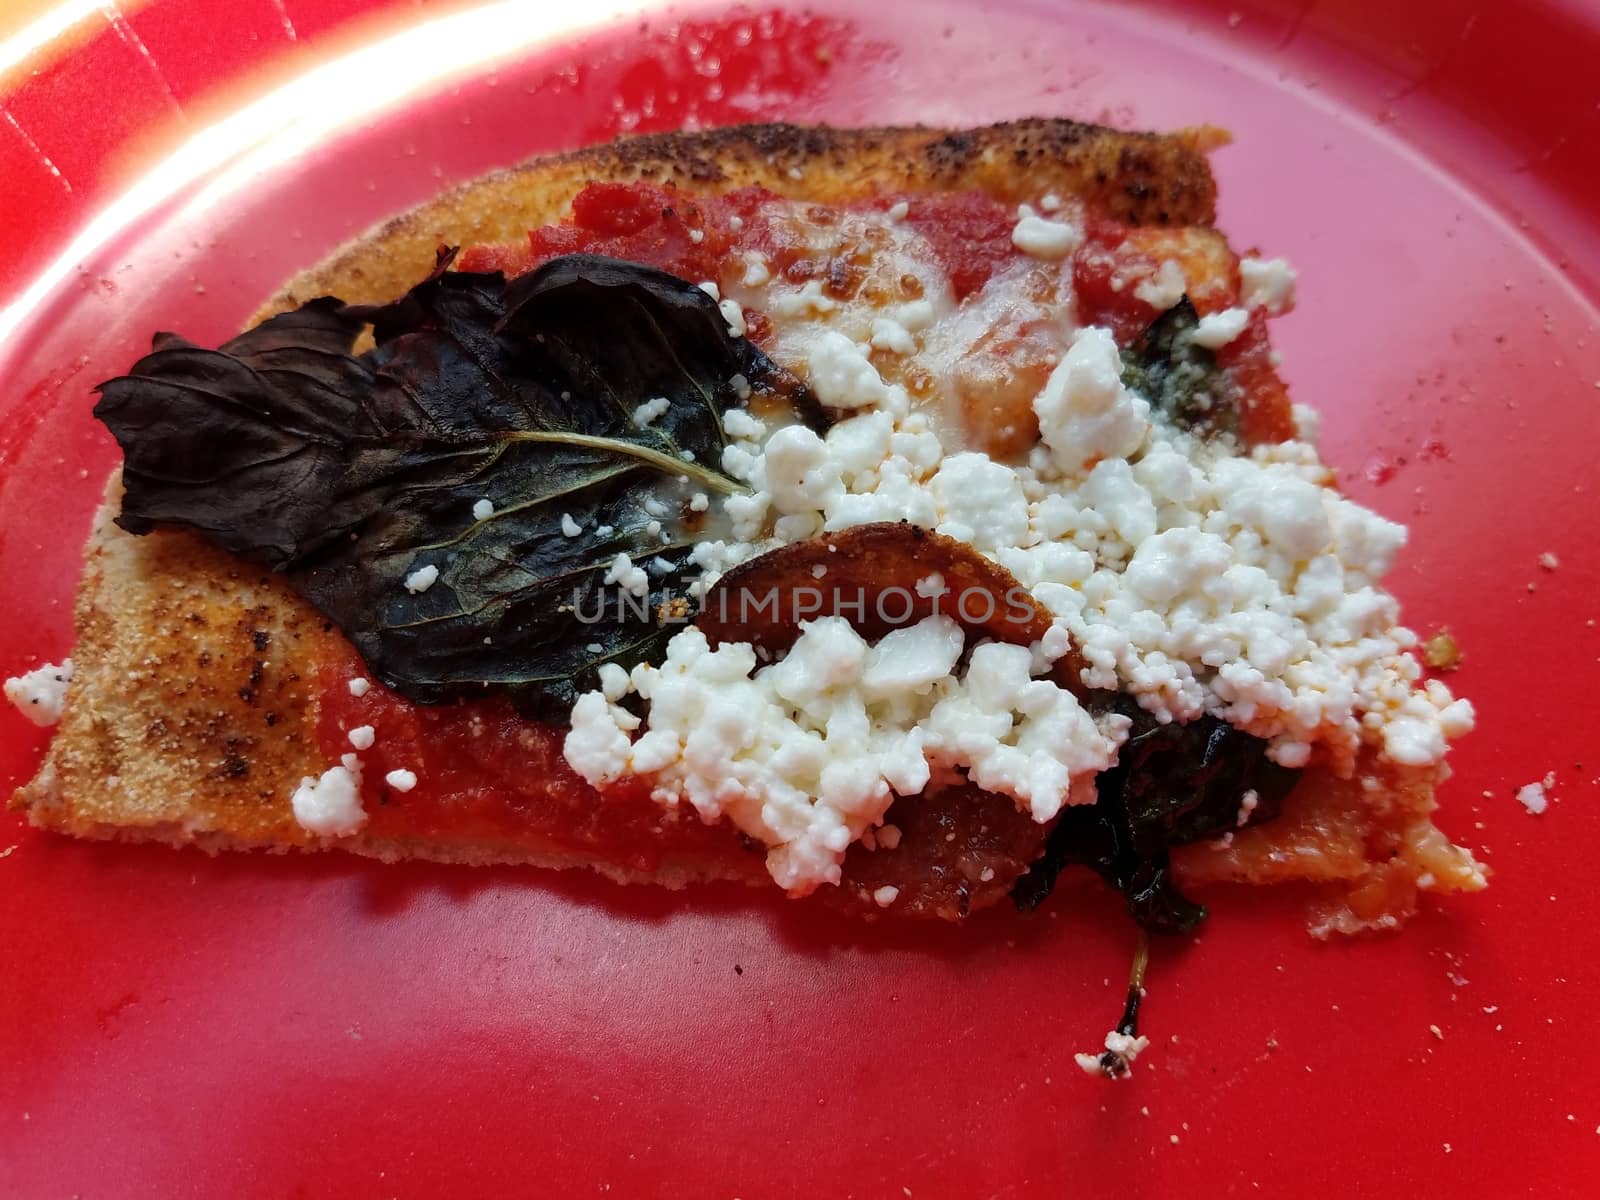 basil leaf and goat cheese on slice of pizza on red plate